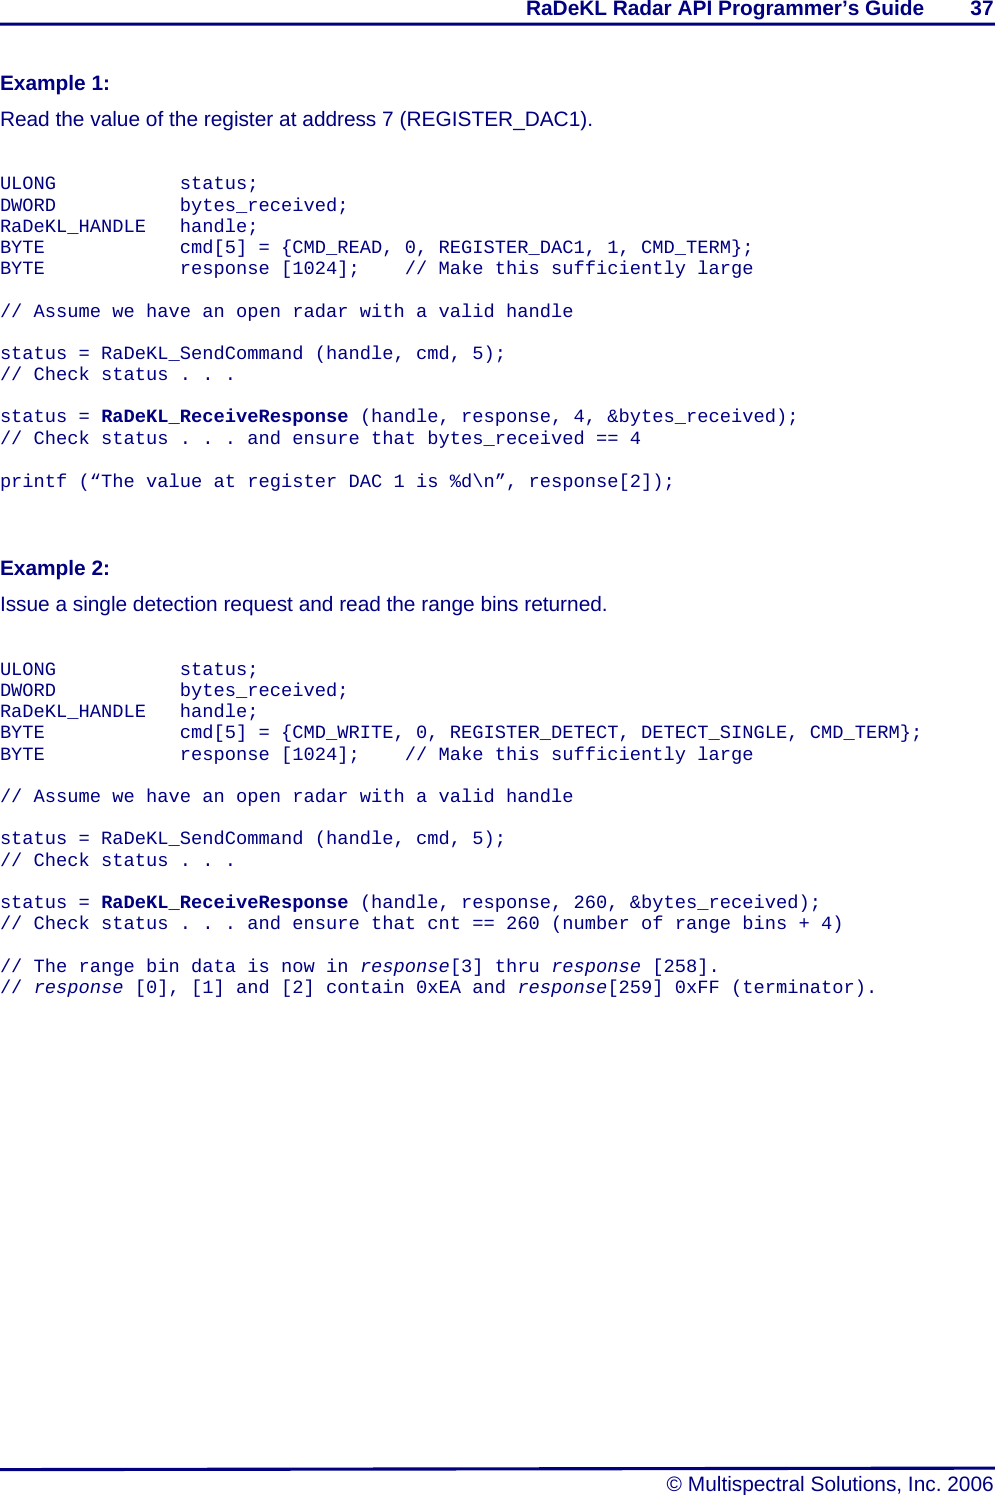 RaDeKL Radar API Programmer’s Guide        37   © Multispectral Solutions, Inc. 2006 Example 1: Read the value of the register at address 7 (REGISTER_DAC1).   ULONG   status; DWORD   bytes_received; RaDeKL_HANDLE handle; BYTE      cmd[5] = {CMD_READ, 0, REGISTER_DAC1, 1, CMD_TERM}; BYTE      response [1024];   // Make this sufficiently large  // Assume we have an open radar with a valid handle  status = RaDeKL_SendCommand (handle, cmd, 5); // Check status . . .  status = RaDeKL_ReceiveResponse (handle, response, 4, &amp;bytes_received); // Check status . . . and ensure that bytes_received == 4  printf (“The value at register DAC 1 is %d\n”, response[2]);    Example 2: Issue a single detection request and read the range bins returned.   ULONG   status; DWORD   bytes_received; RaDeKL_HANDLE handle; BYTE      cmd[5] = {CMD_WRITE, 0, REGISTER_DETECT, DETECT_SINGLE, CMD_TERM}; BYTE      response [1024];   // Make this sufficiently large  // Assume we have an open radar with a valid handle  status = RaDeKL_SendCommand (handle, cmd, 5); // Check status . . .  status = RaDeKL_ReceiveResponse (handle, response, 260, &amp;bytes_received); // Check status . . . and ensure that cnt == 260 (number of range bins + 4)  // The range bin data is now in response[3] thru response [258]. // response [0], [1] and [2] contain 0xEA and response[259] 0xFF (terminator).    